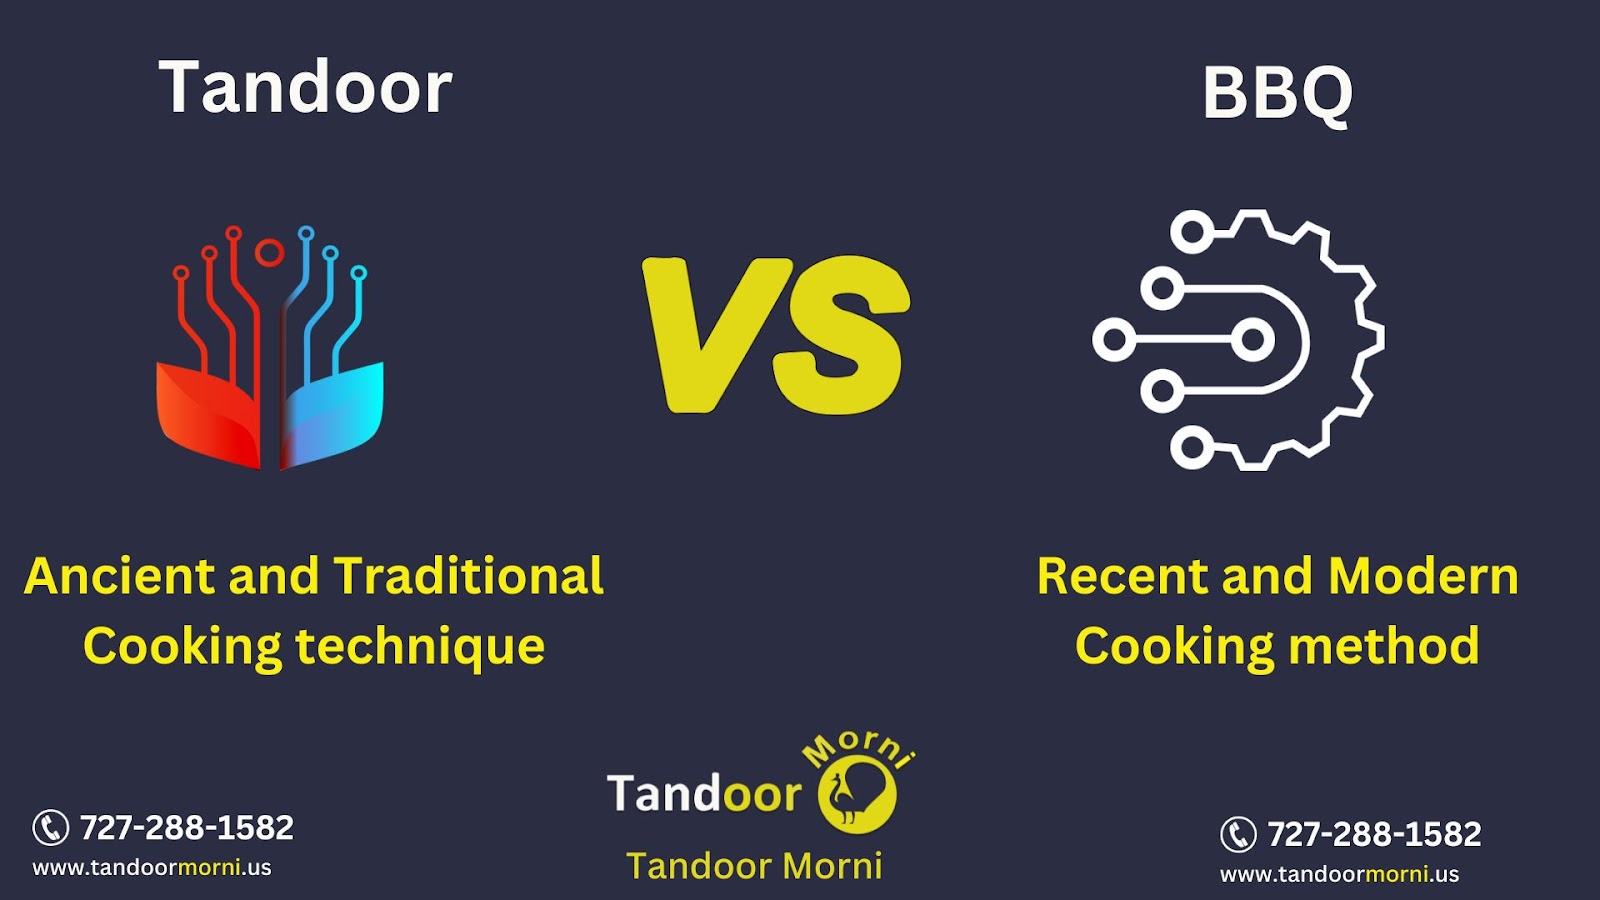 Tandoori cooking is ancient and traditional, whereas barbecue cooking is new and modern.